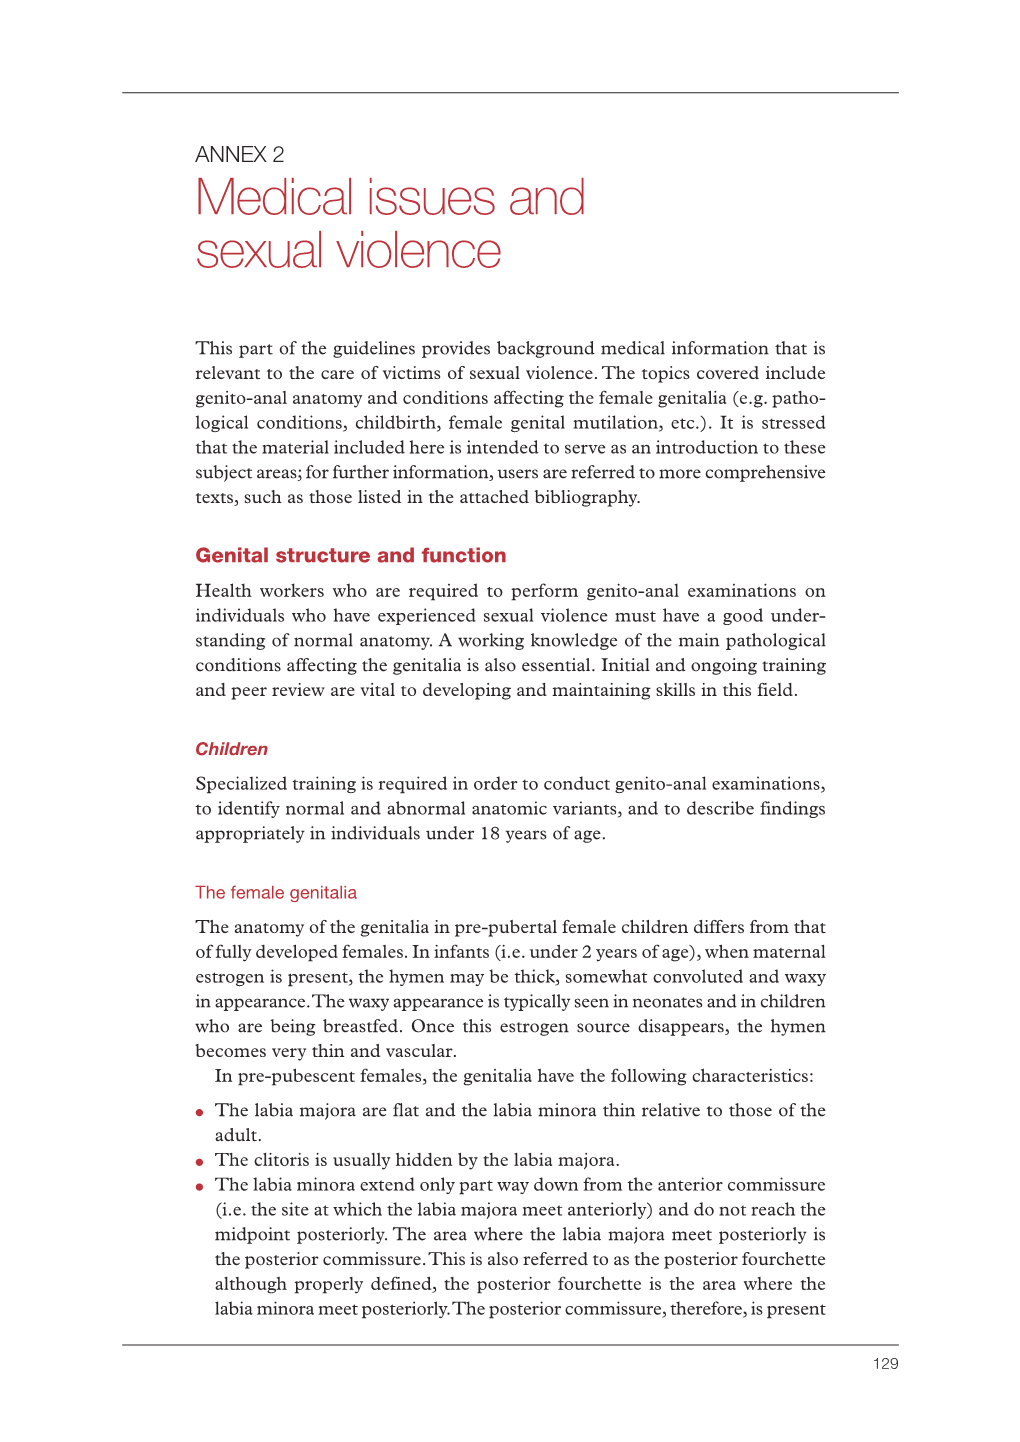 Medical Issues and Sexual Violence